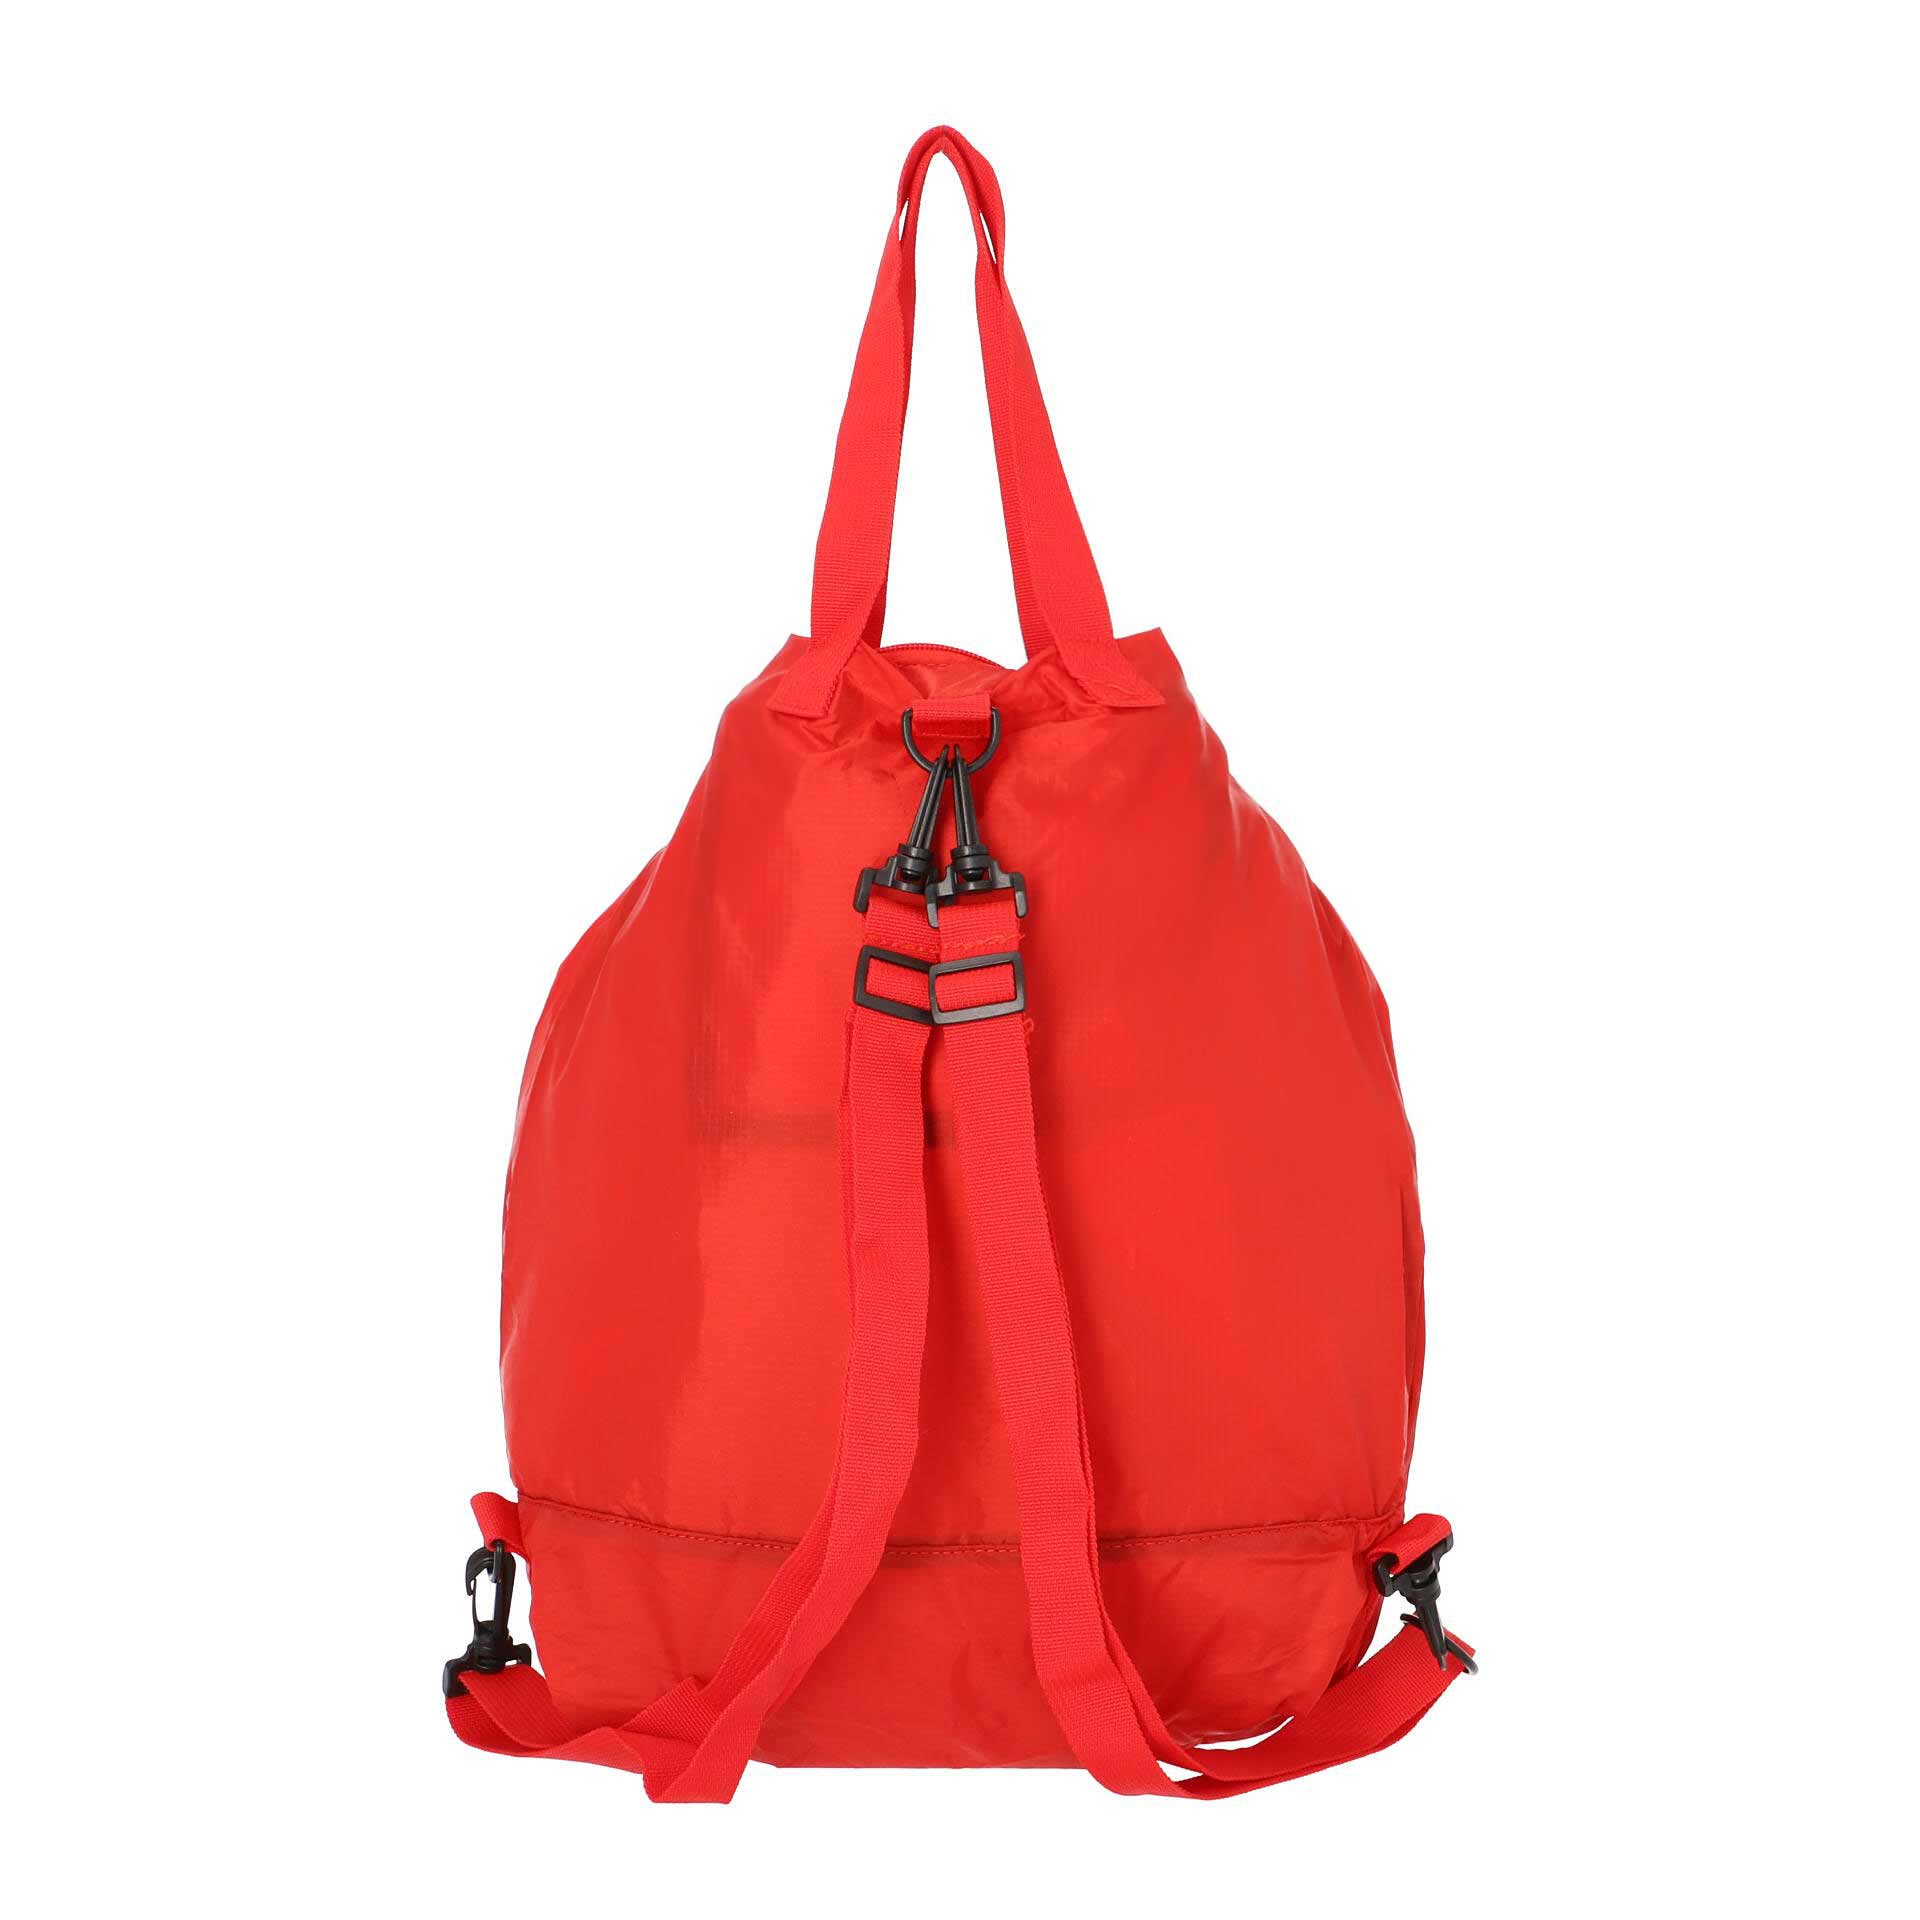 Jost Visby X-Change Bag S red